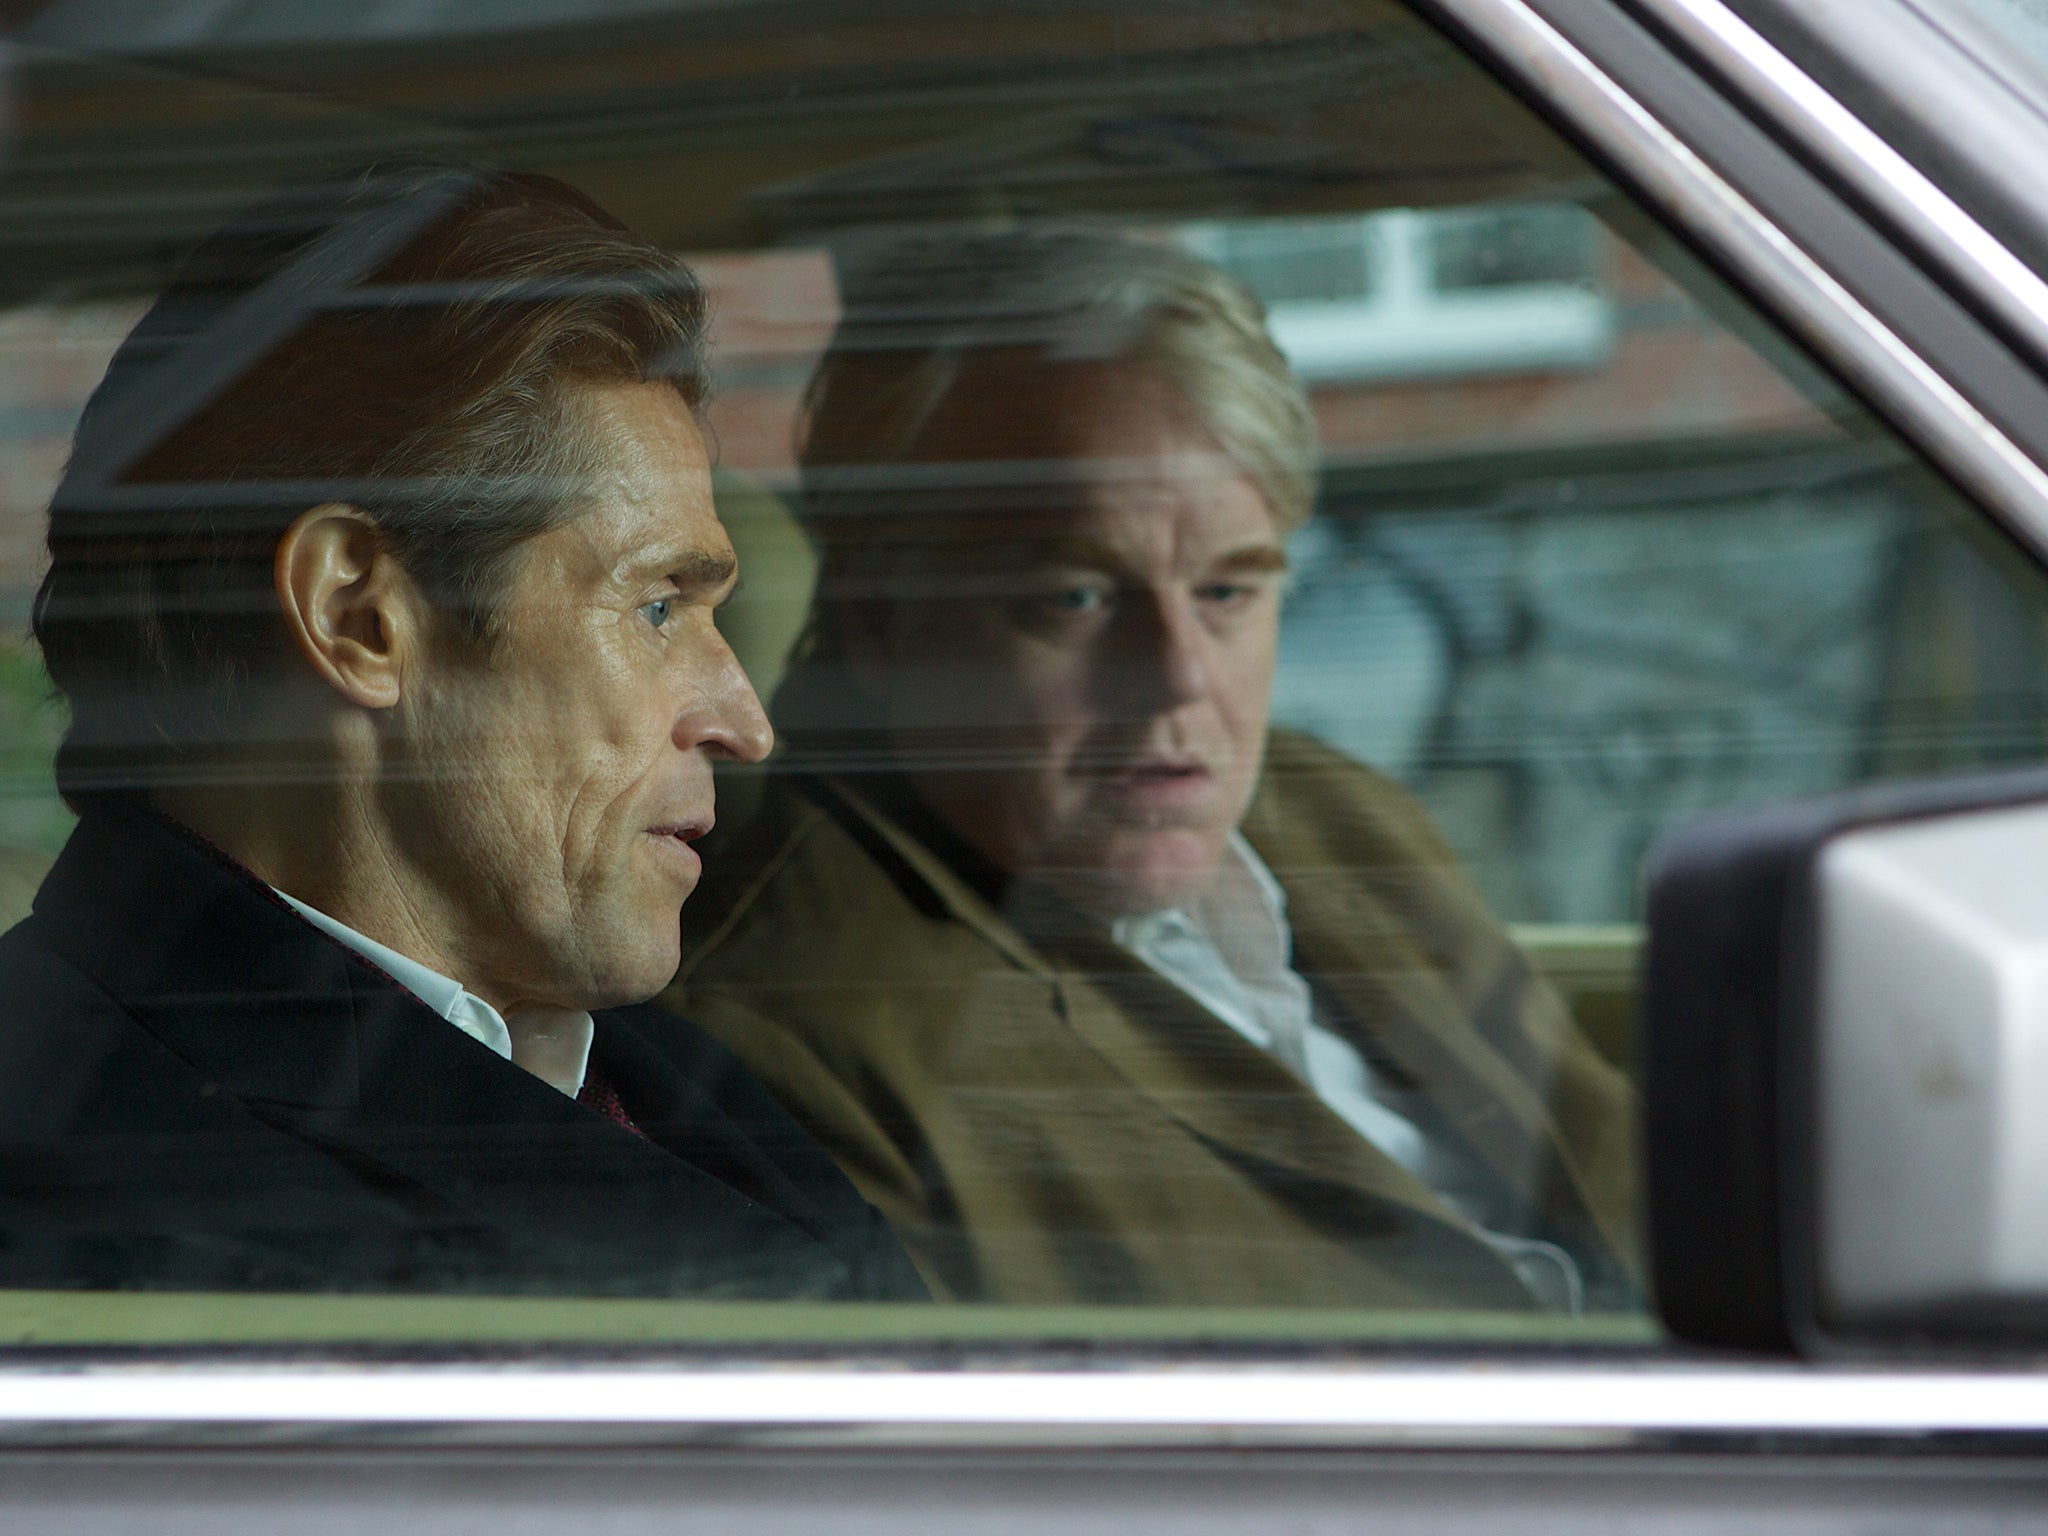 Willem Dafoe and Philip Seymour Hoffman in A Most Wanted Man